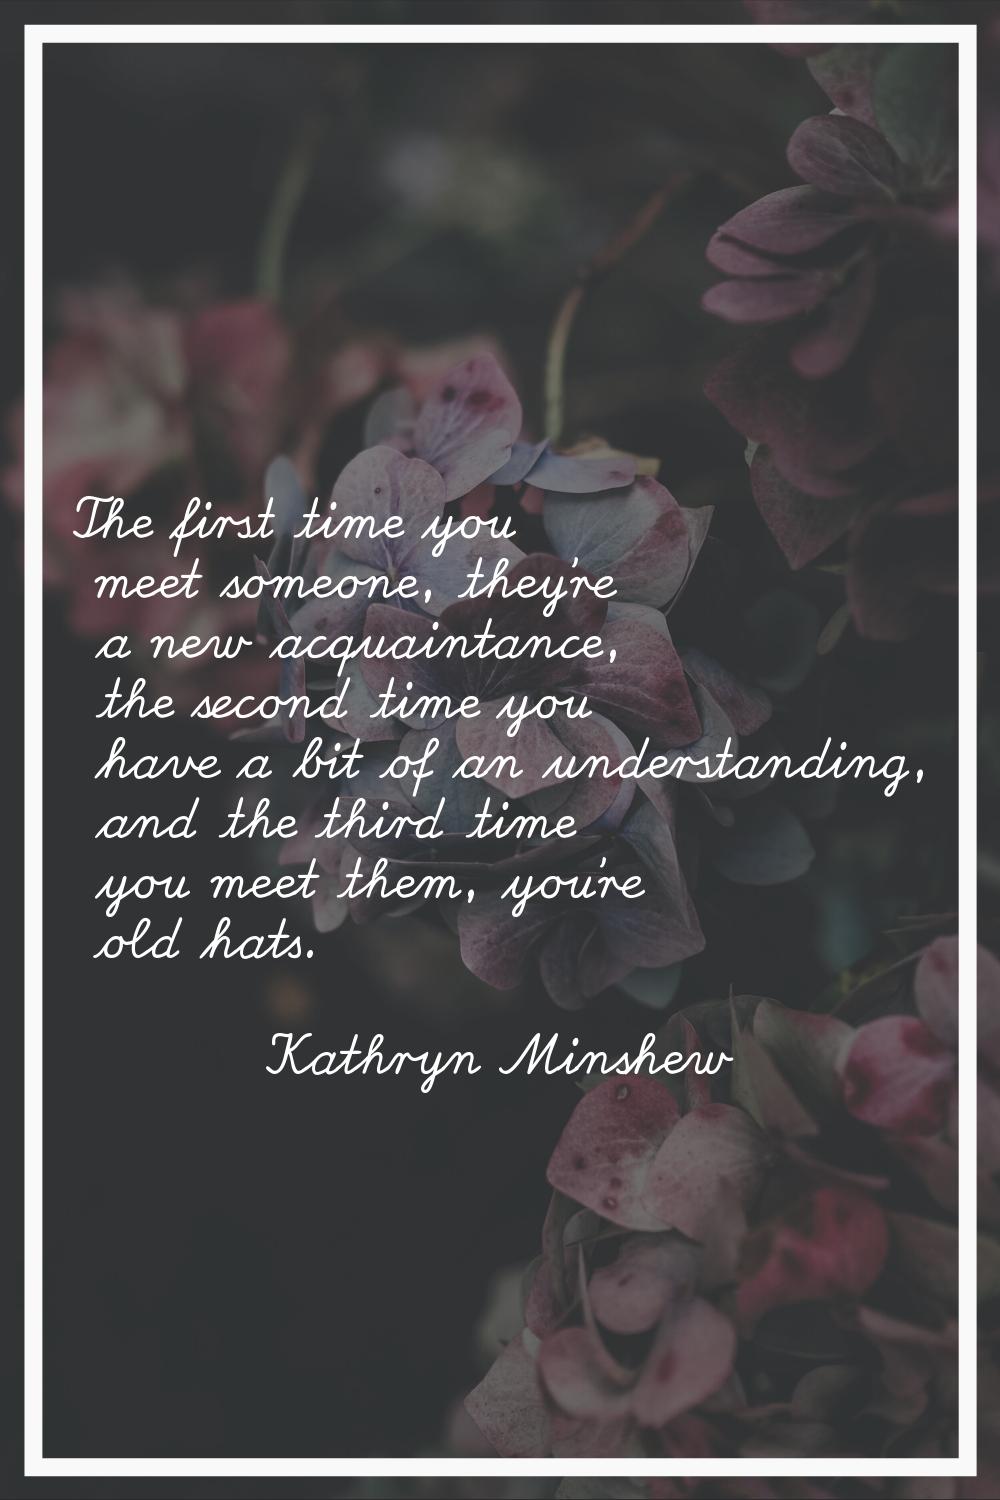 The first time you meet someone, they're a new acquaintance, the second time you have a bit of an u